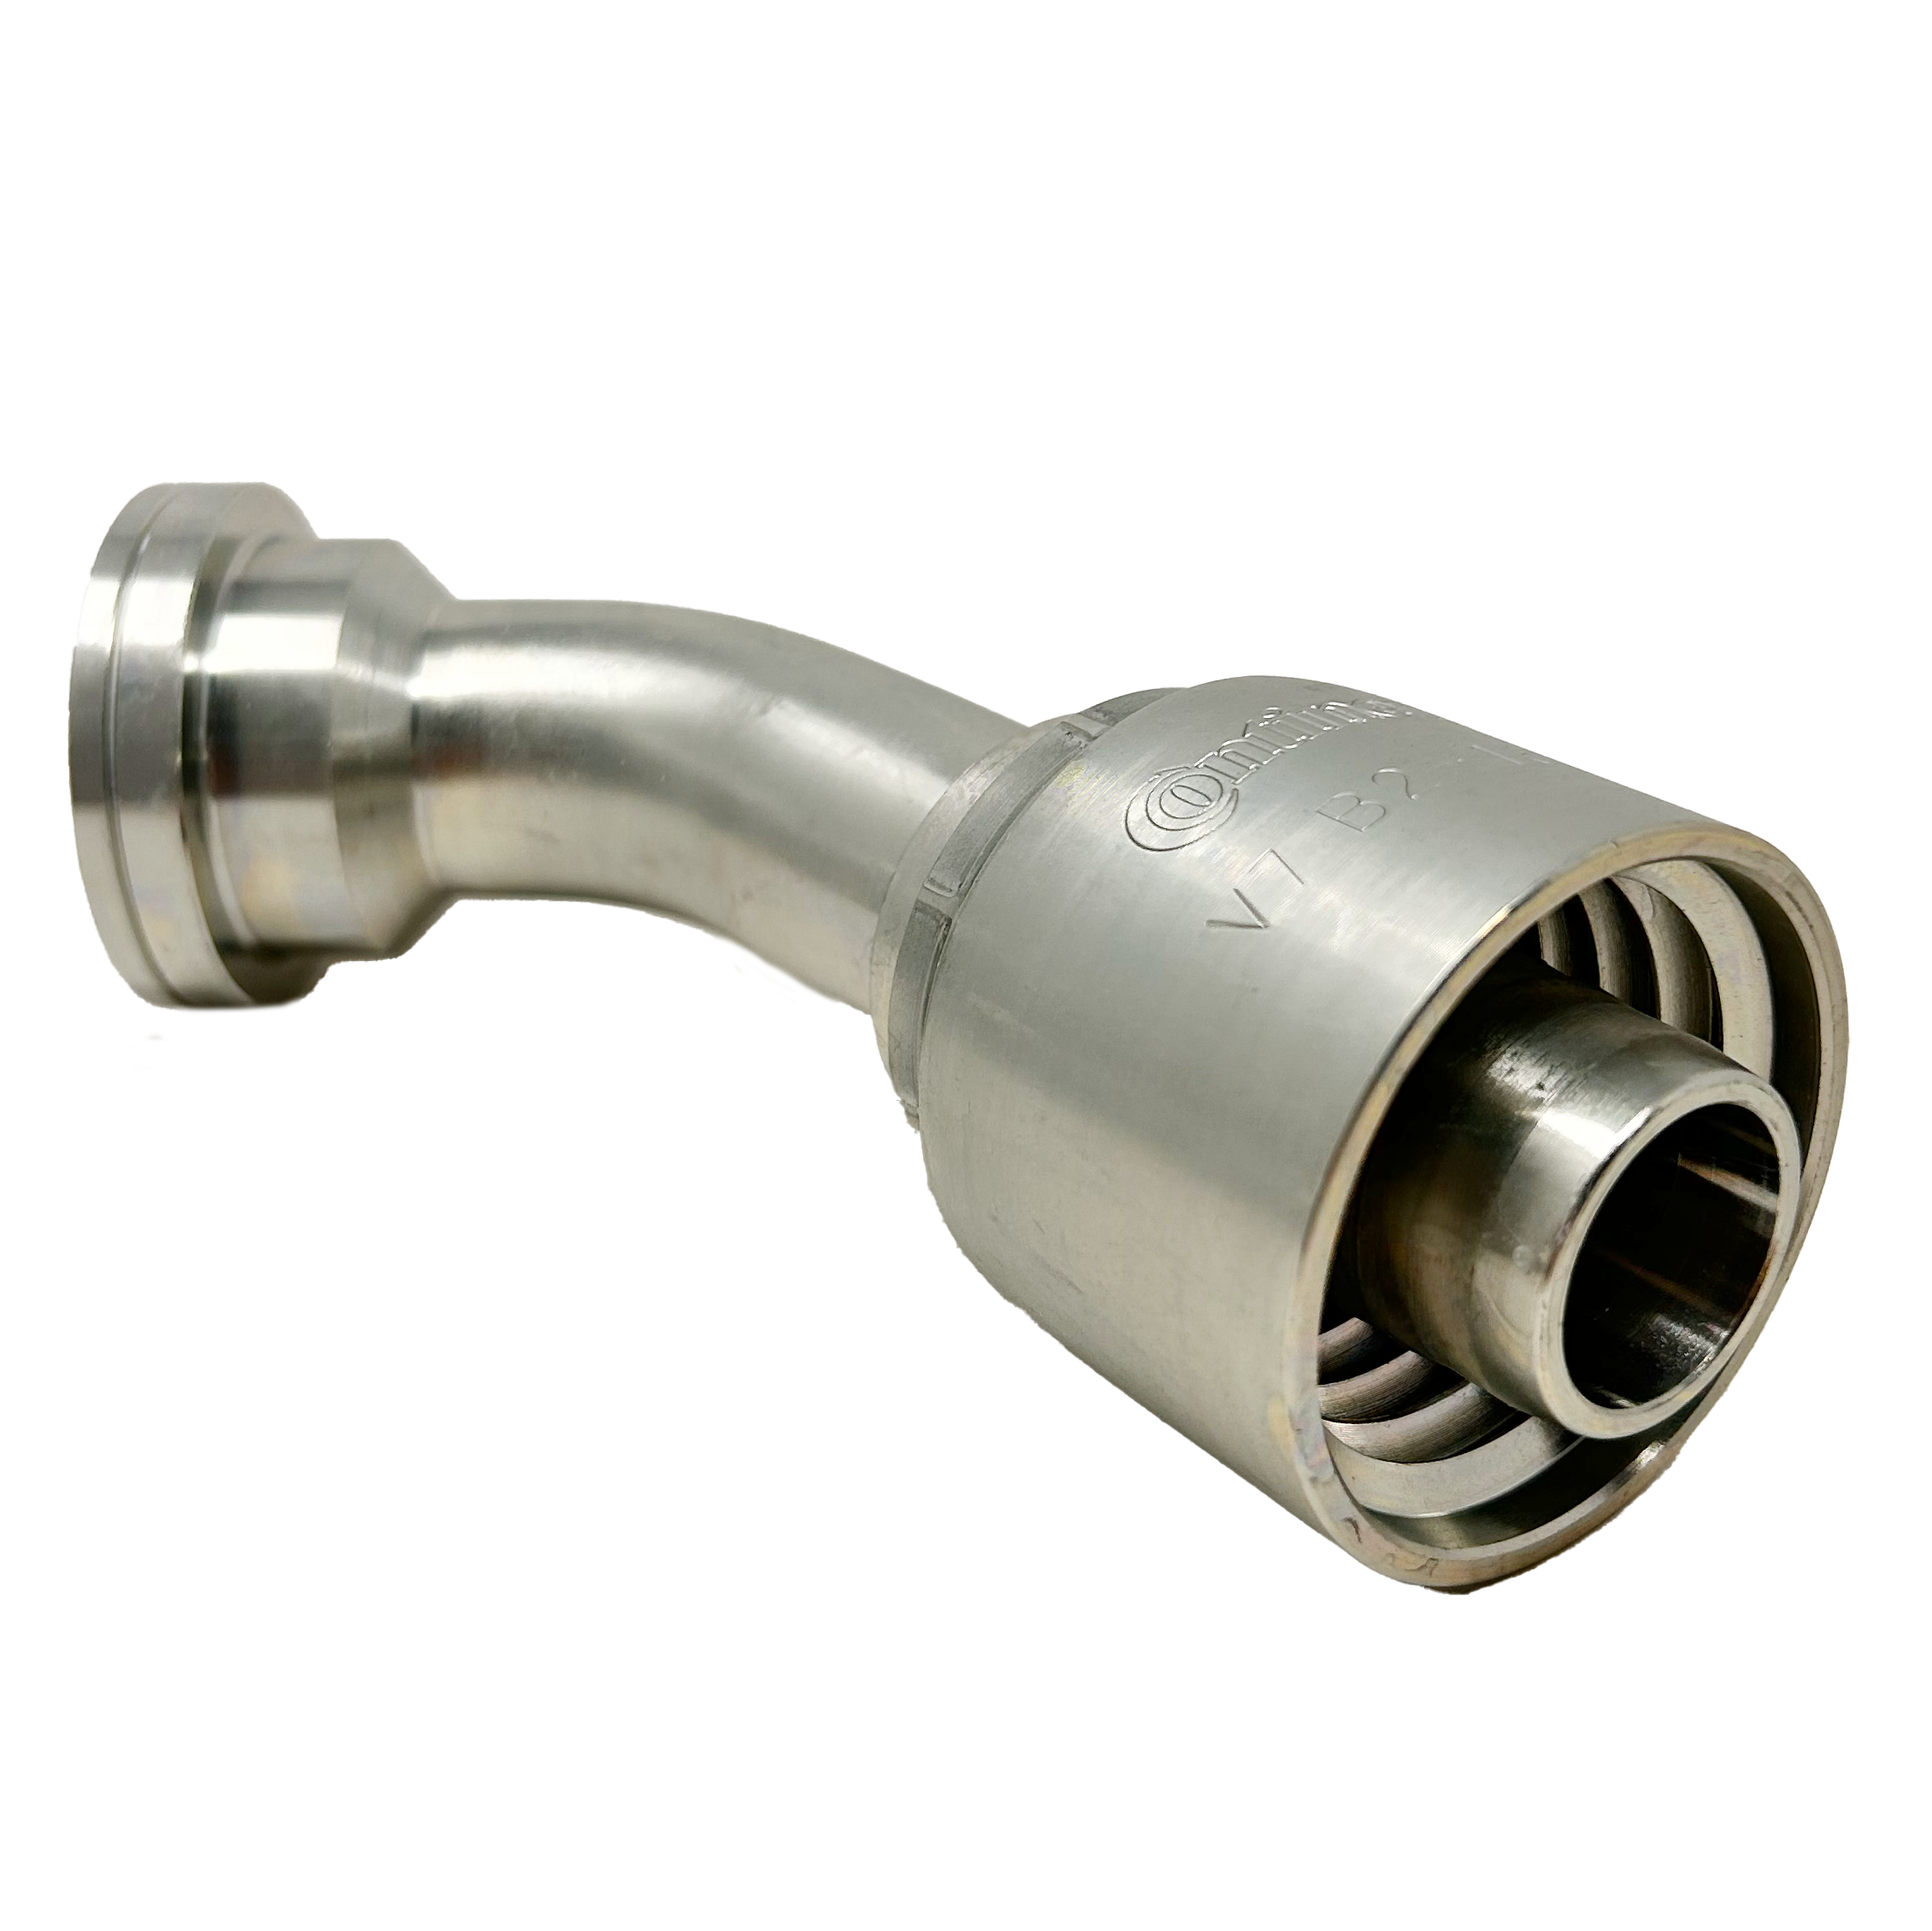 B2-FH45-2020: Continental Hose Fitting, 1.25 (1-1/4") Hose ID x 1.25 (1-1/4") Code 62, 45-Degree Connection